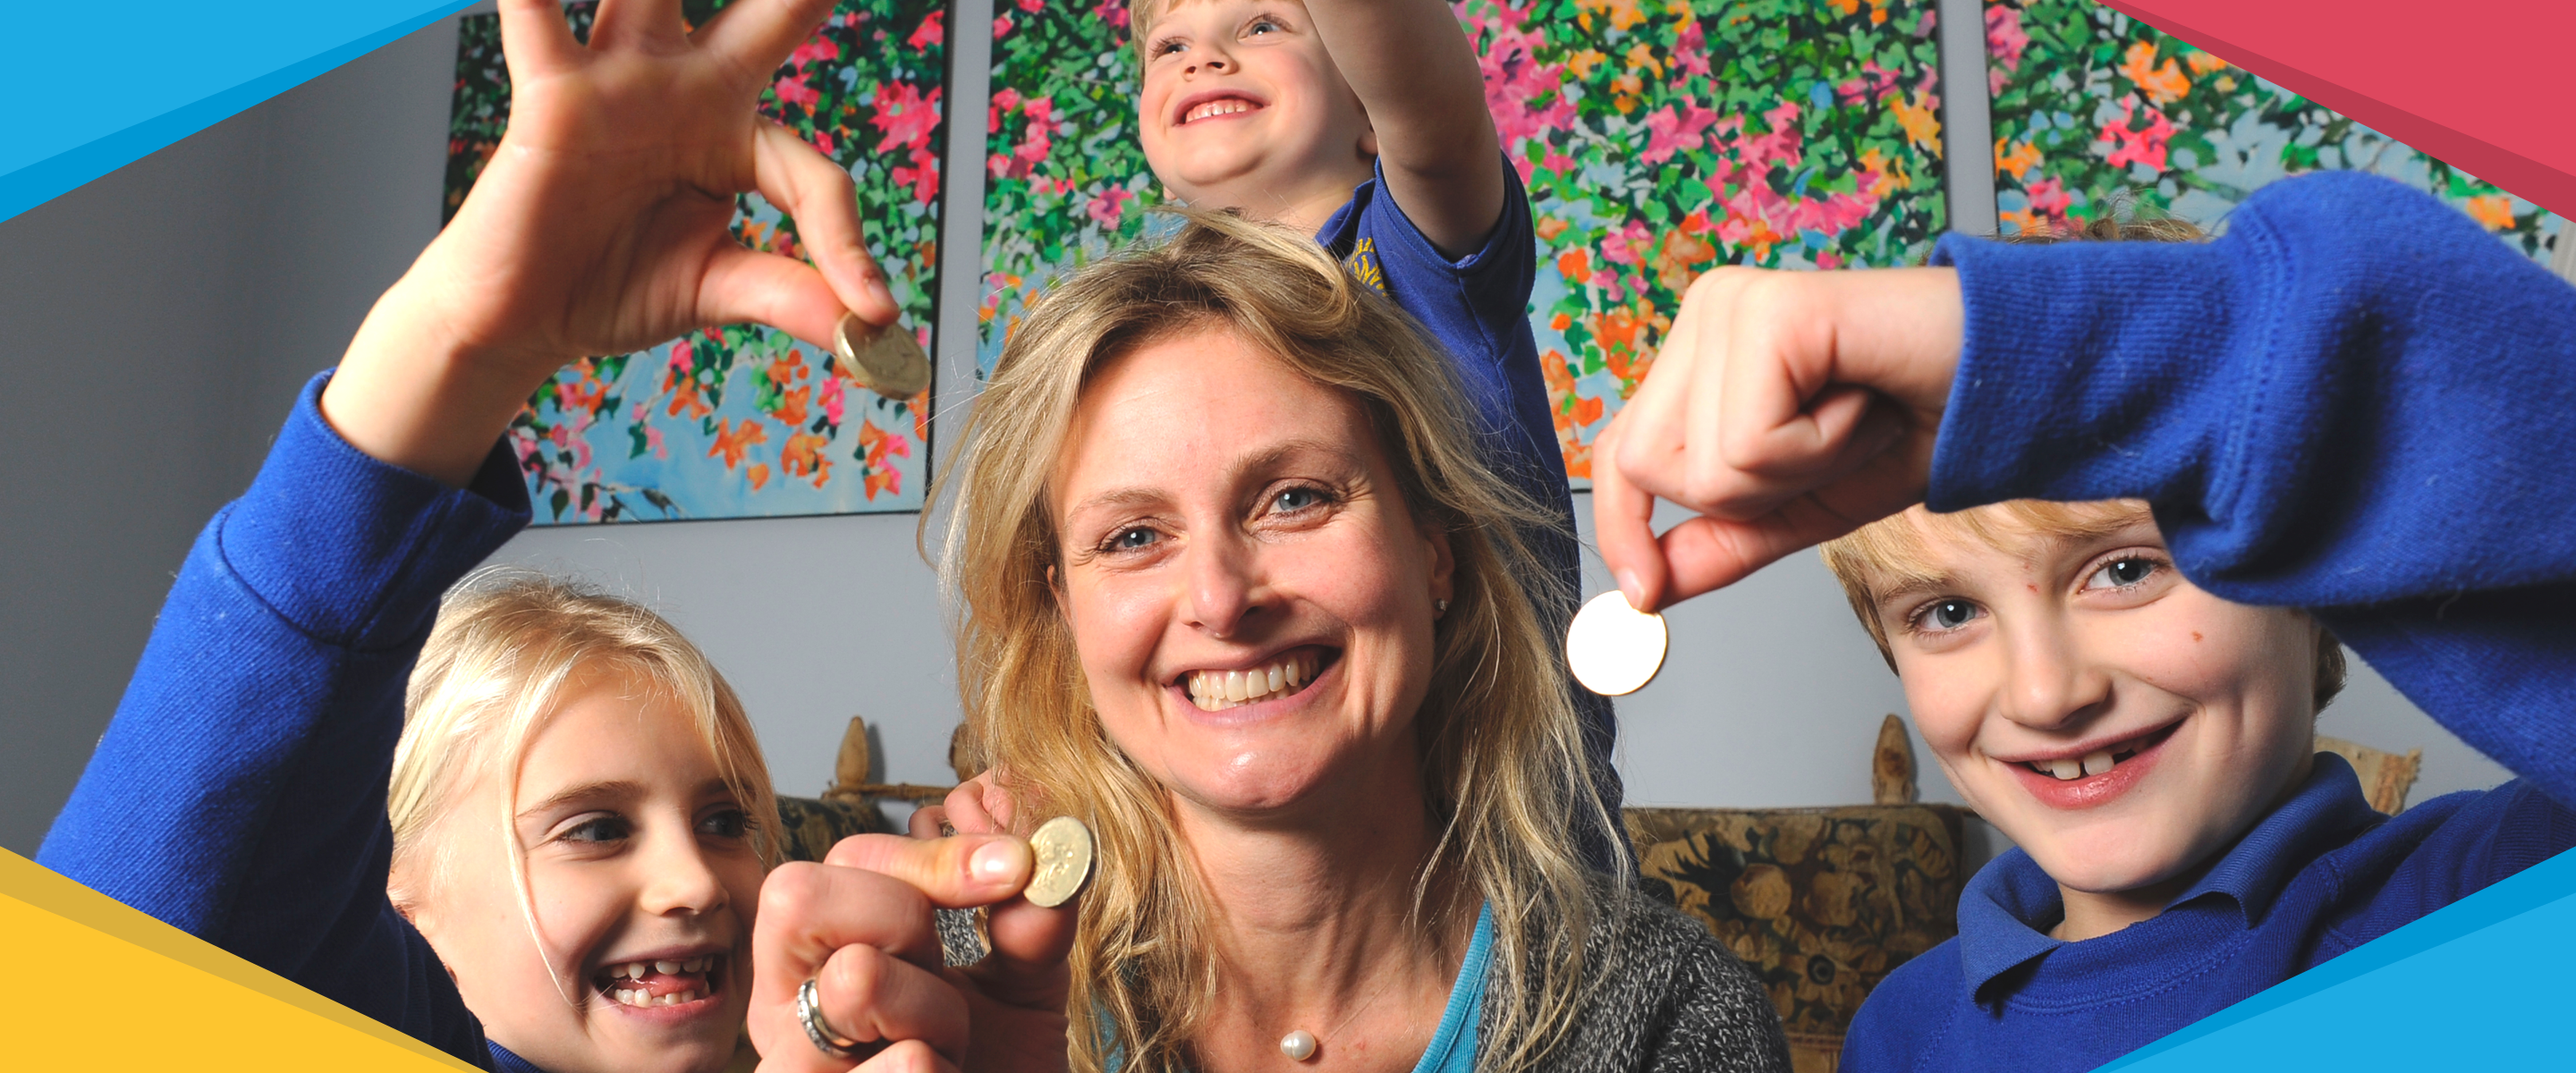 A smiling family of a Mum and three children each holding up a coin, sitting in a living room with origami shapes overlaid decorating the corners